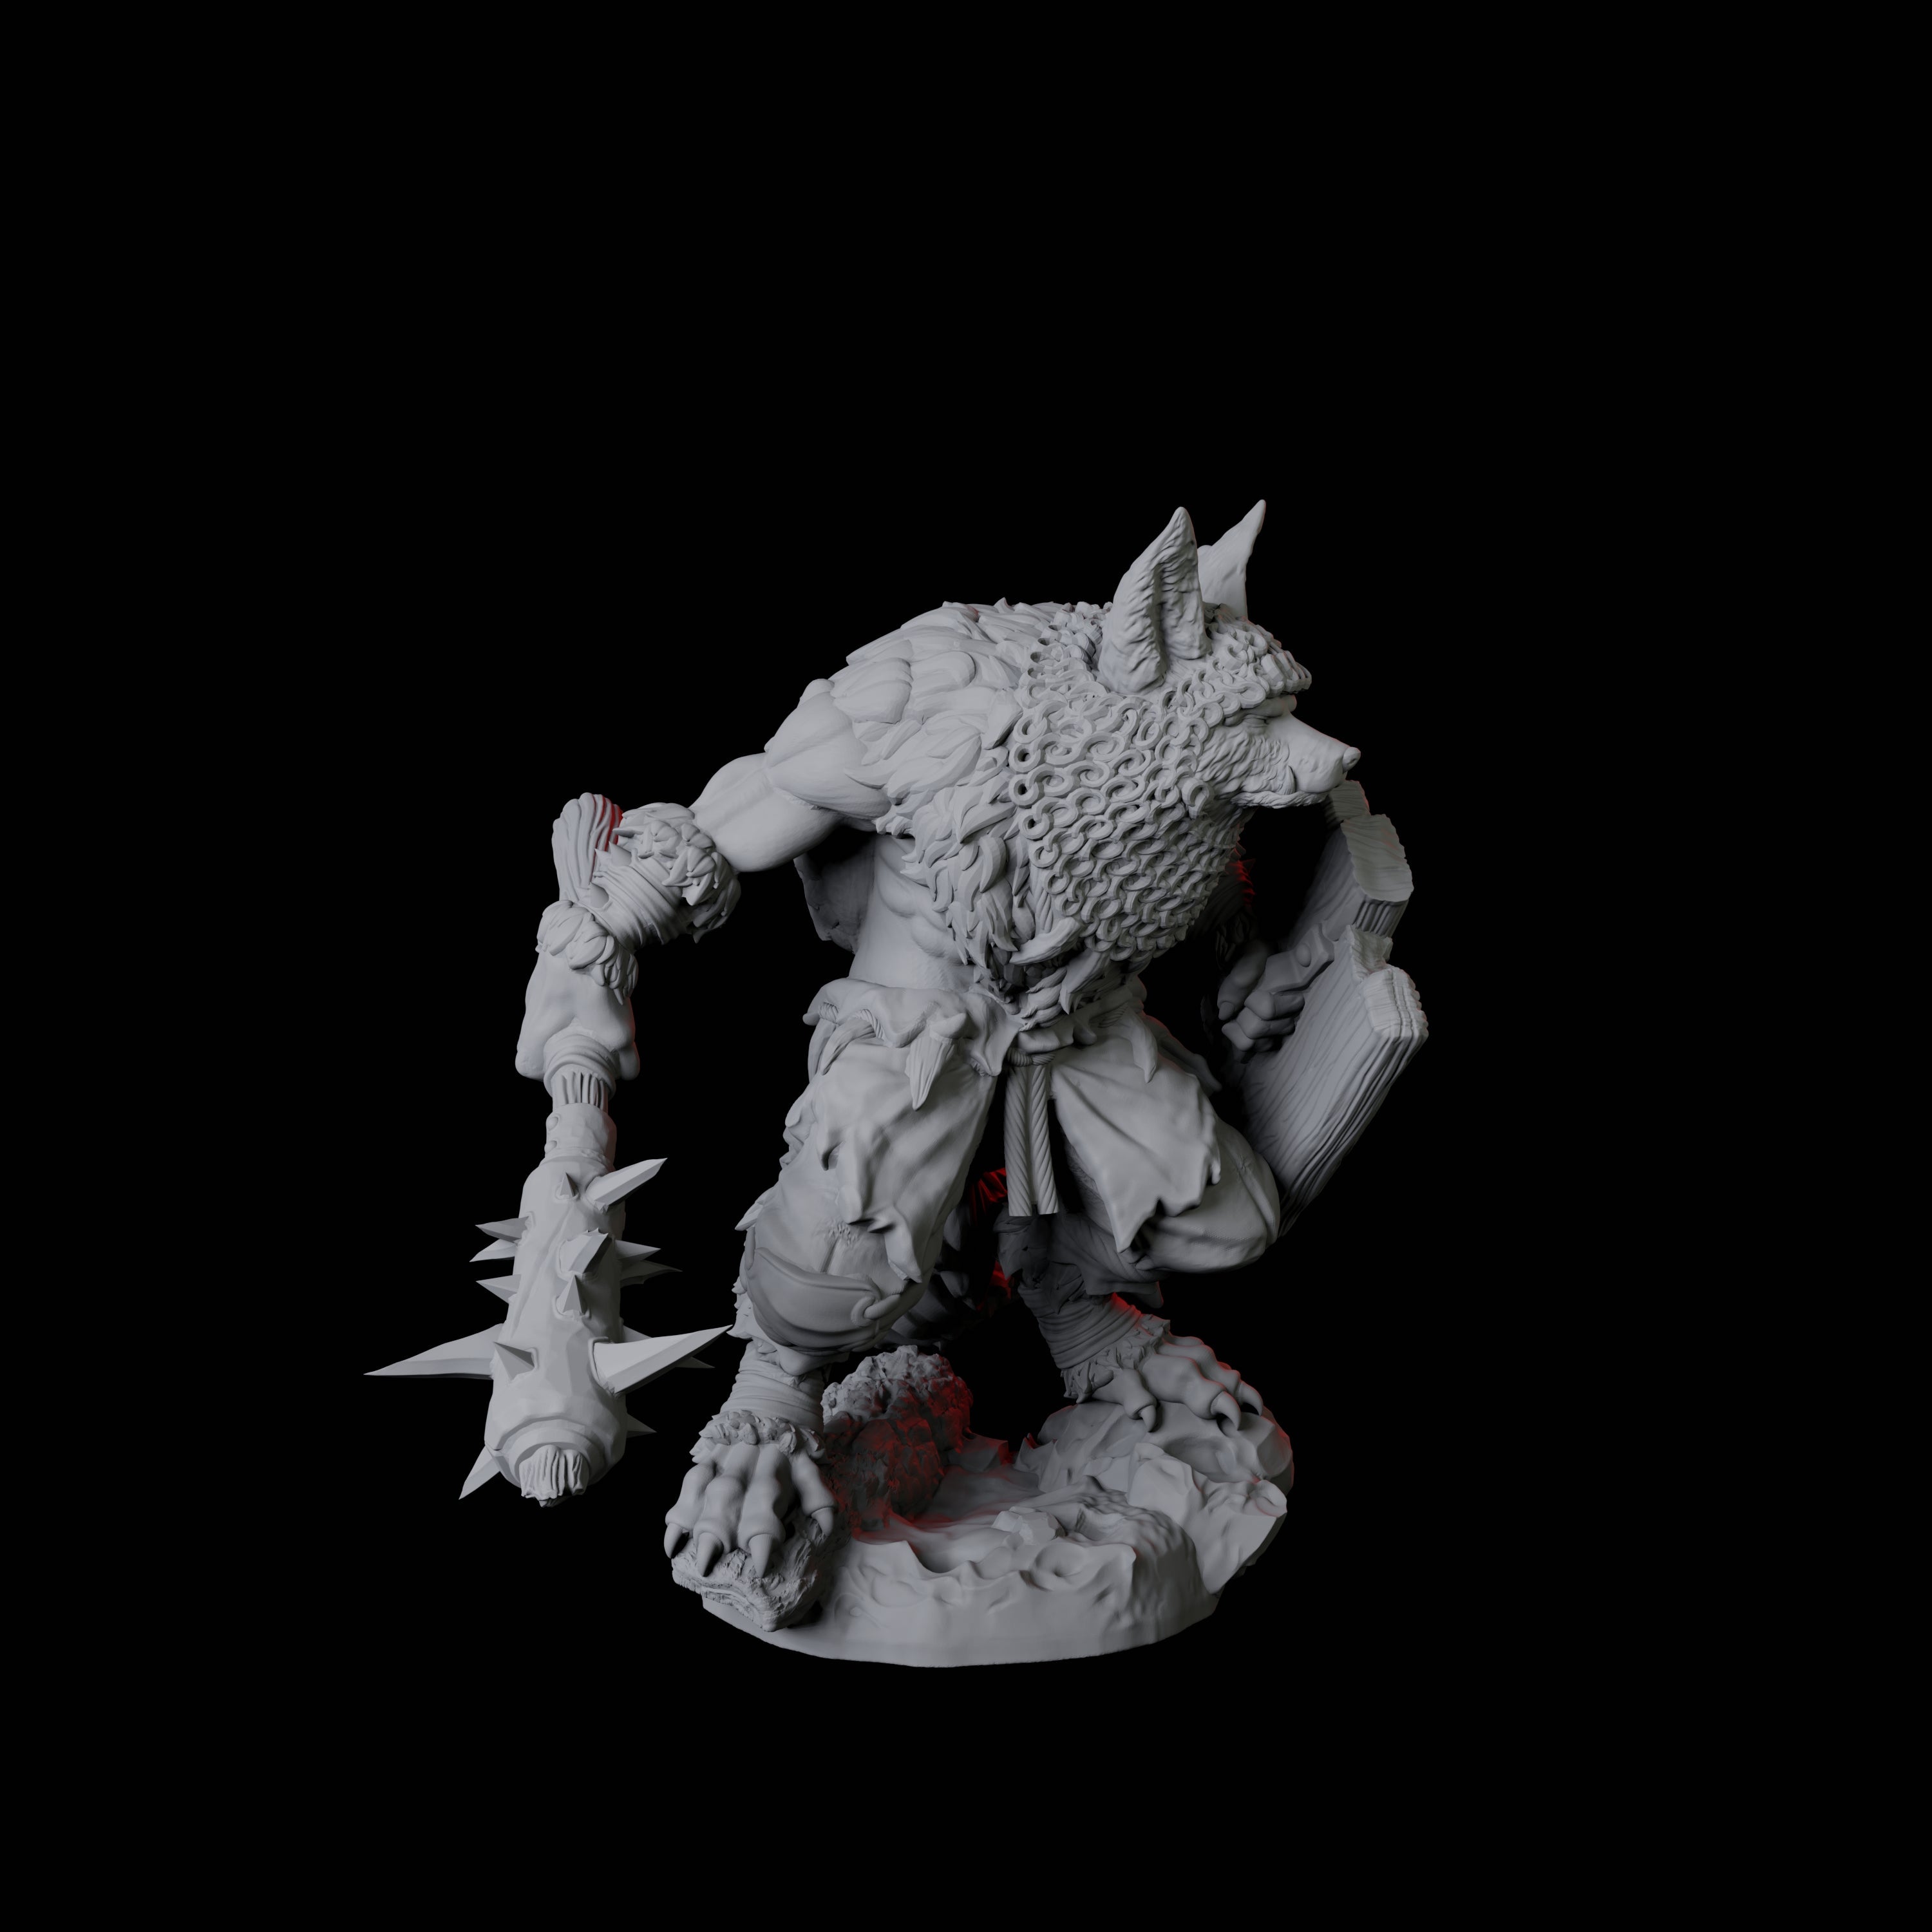 Cunning Kitsune Fighter B Miniature for Dungeons and Dragons, Pathfinder or other TTRPGs